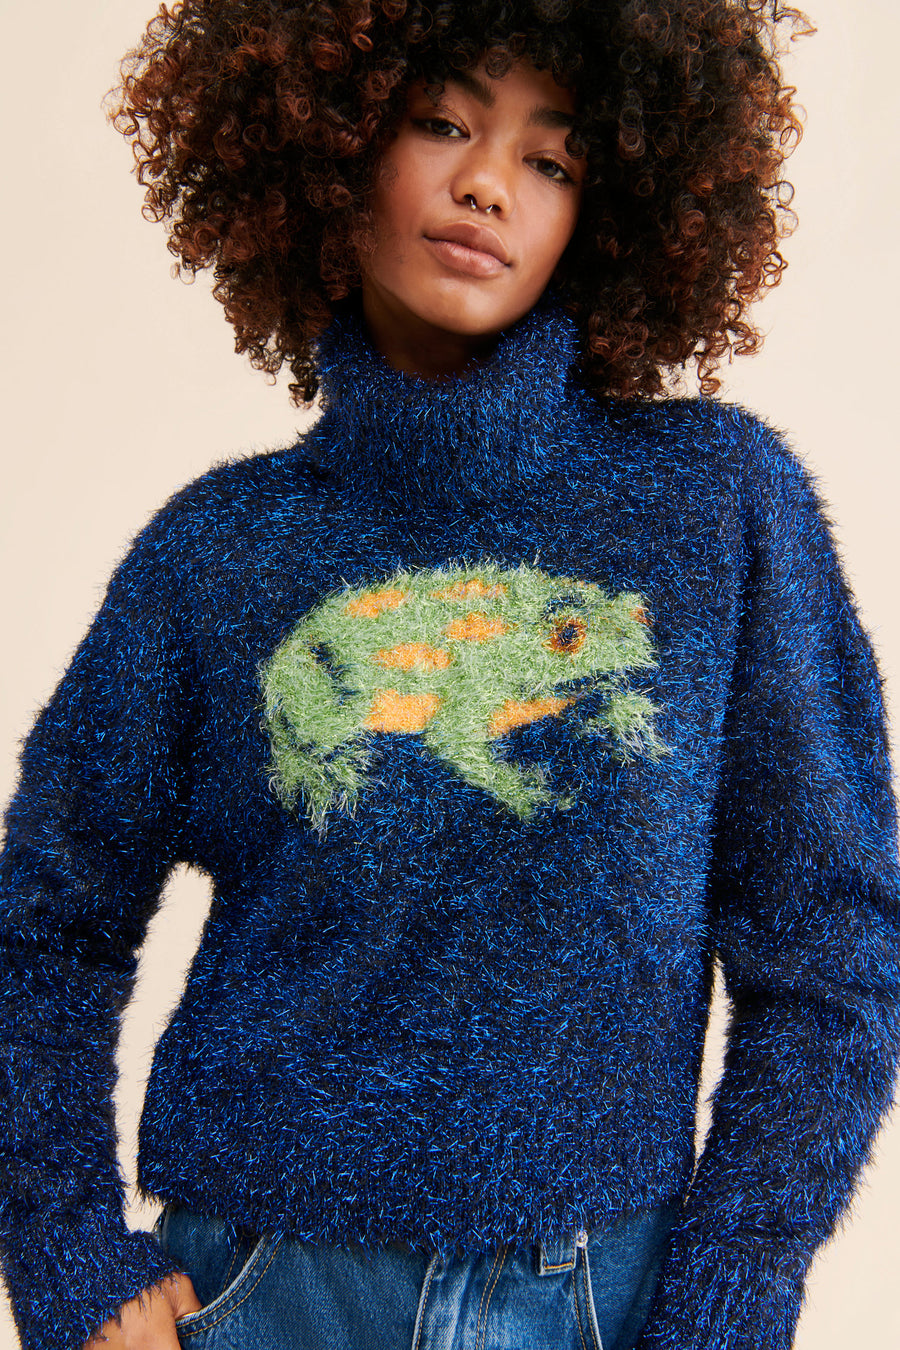 Freddy the Frog Sweater